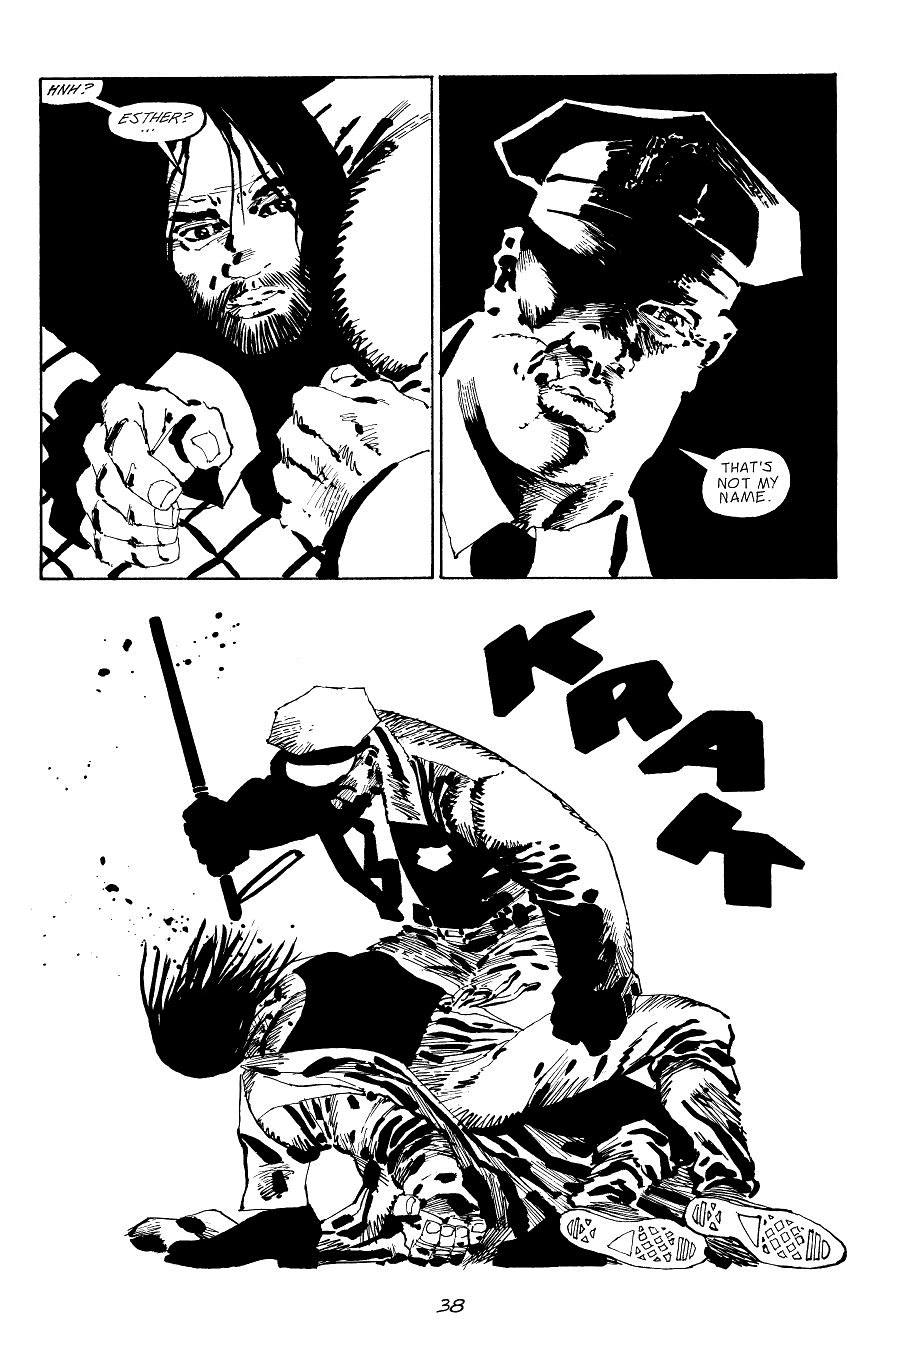 page 38 of sin city 7 hell and back